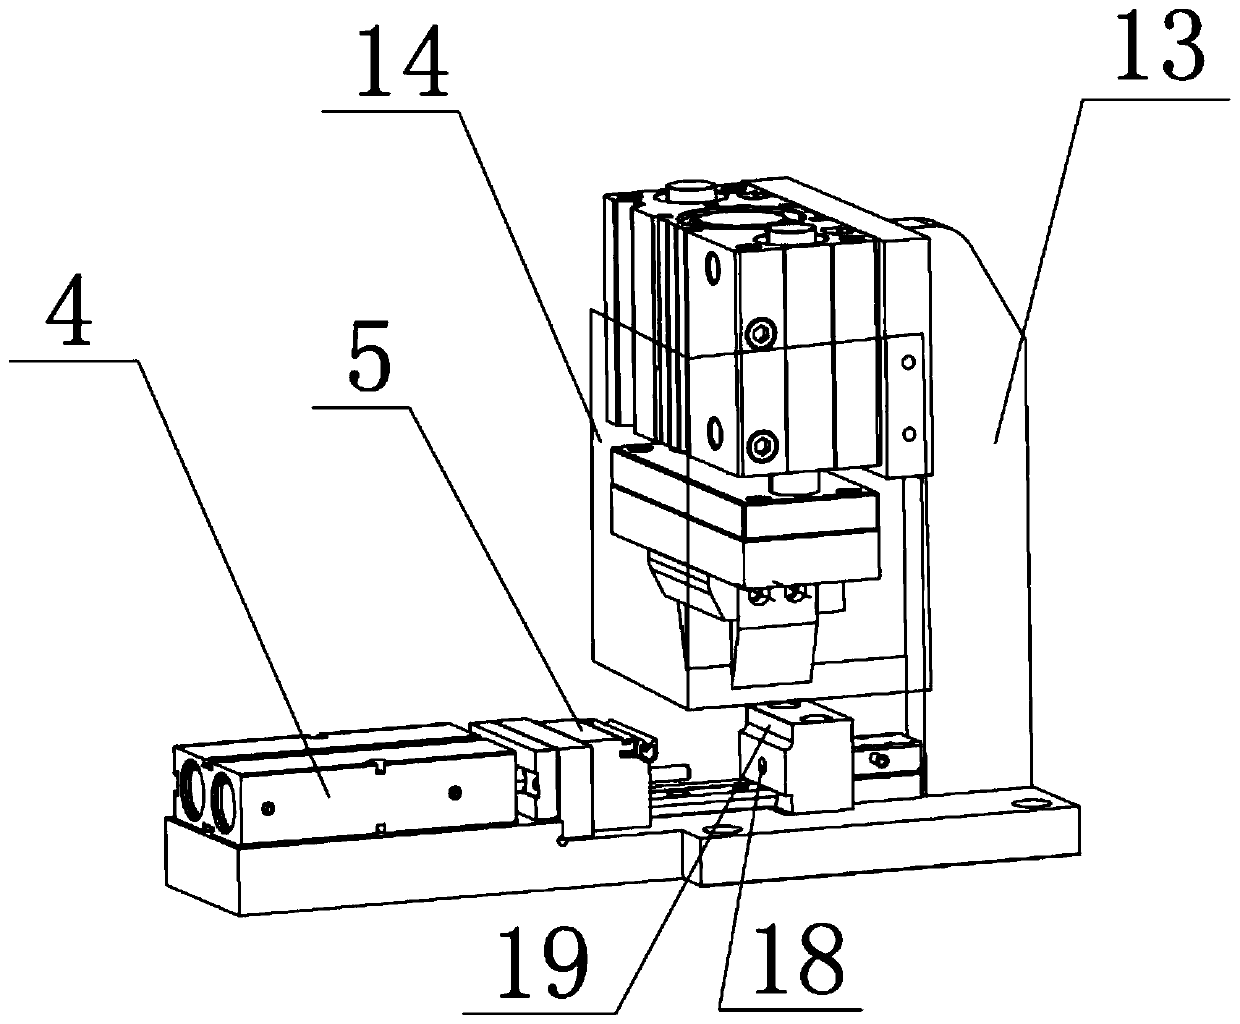 A device for realizing continuous punching and cutting of double-skeleton products through cylinder movement